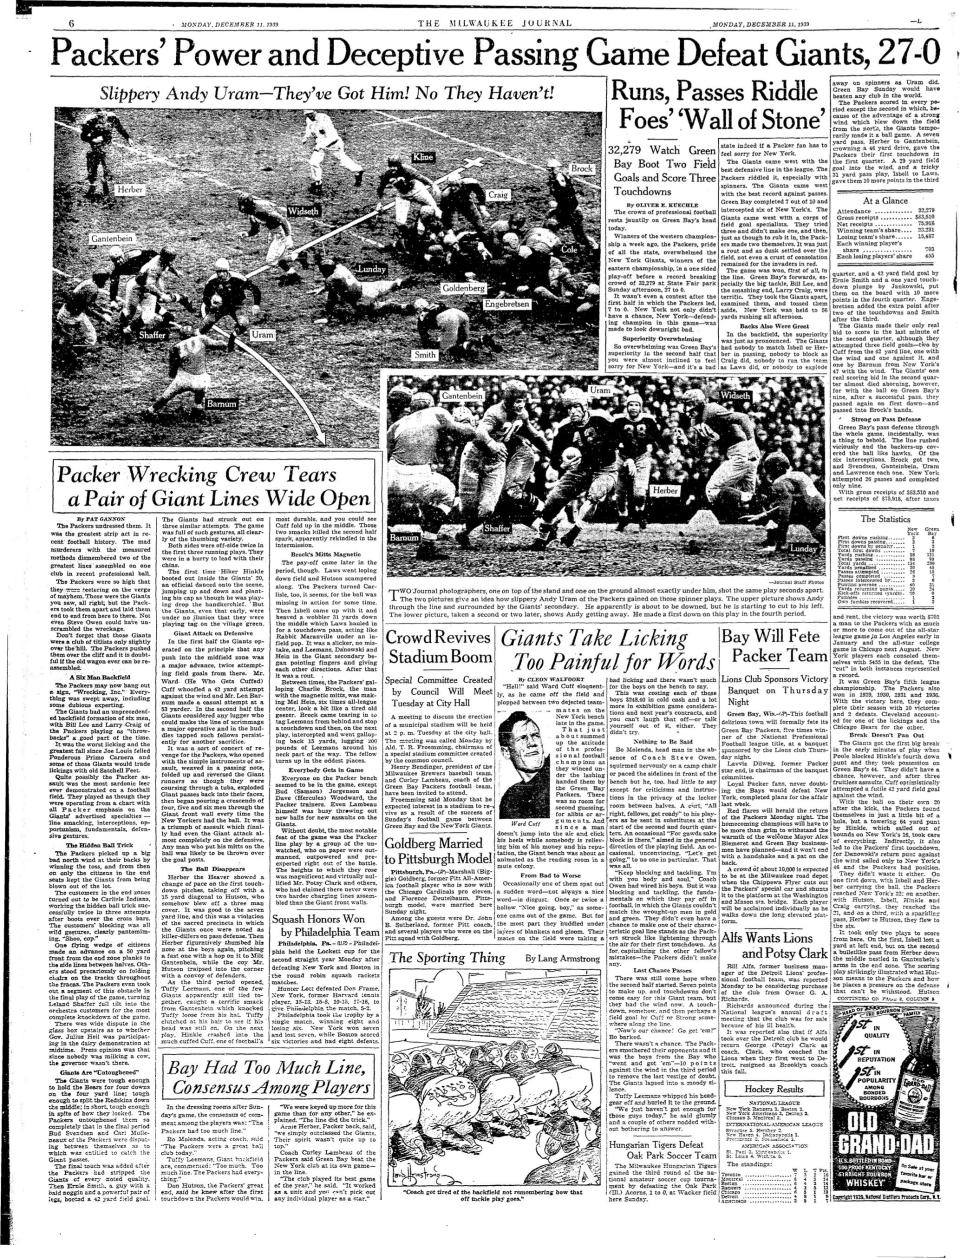 How the Packers championship appeared in the pages of the Milwaukee Sentinel.